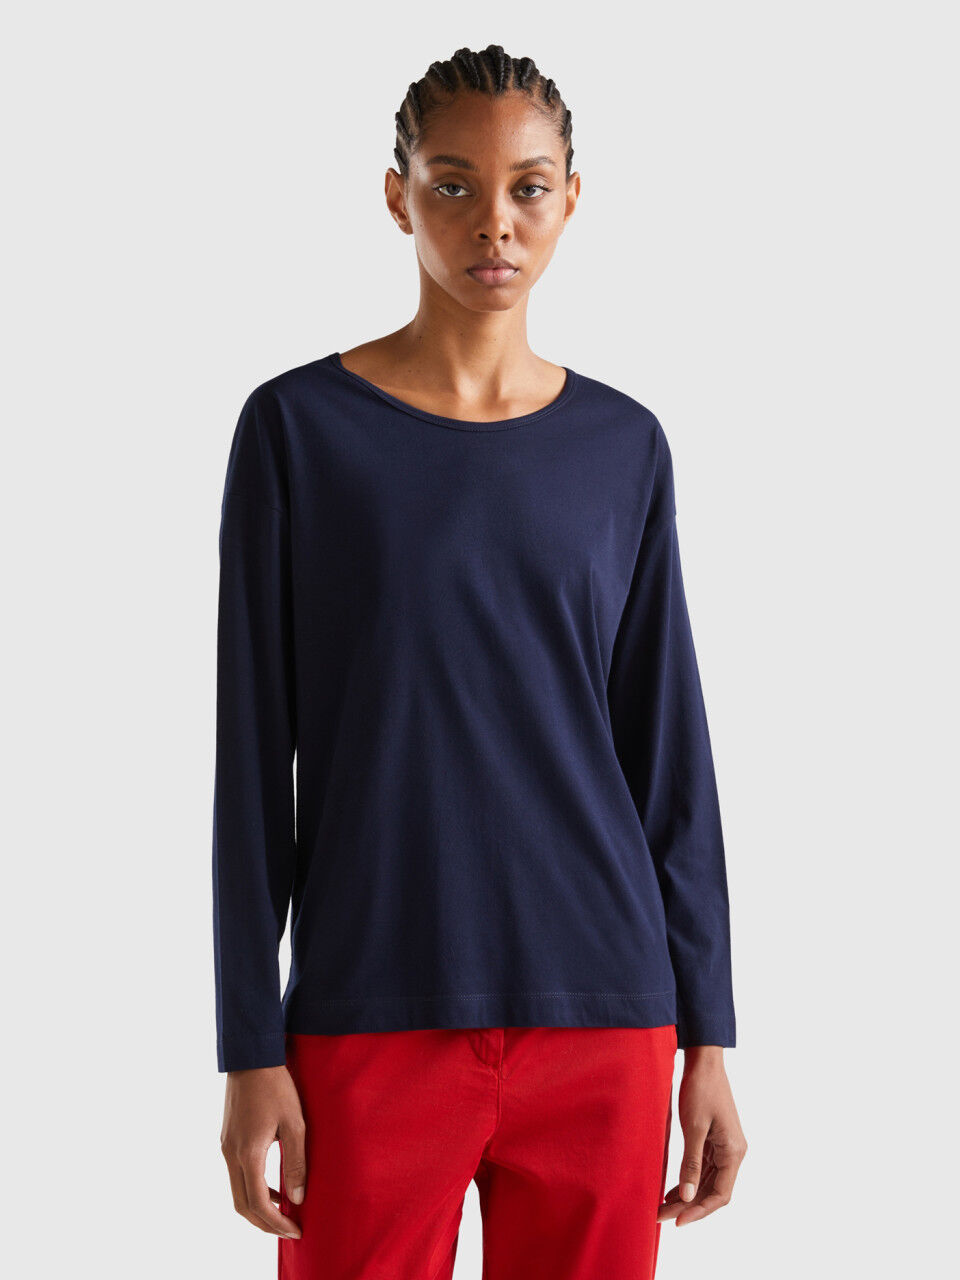 Women's Long Sleeve T-shirts New Collection 2023 | Benetton